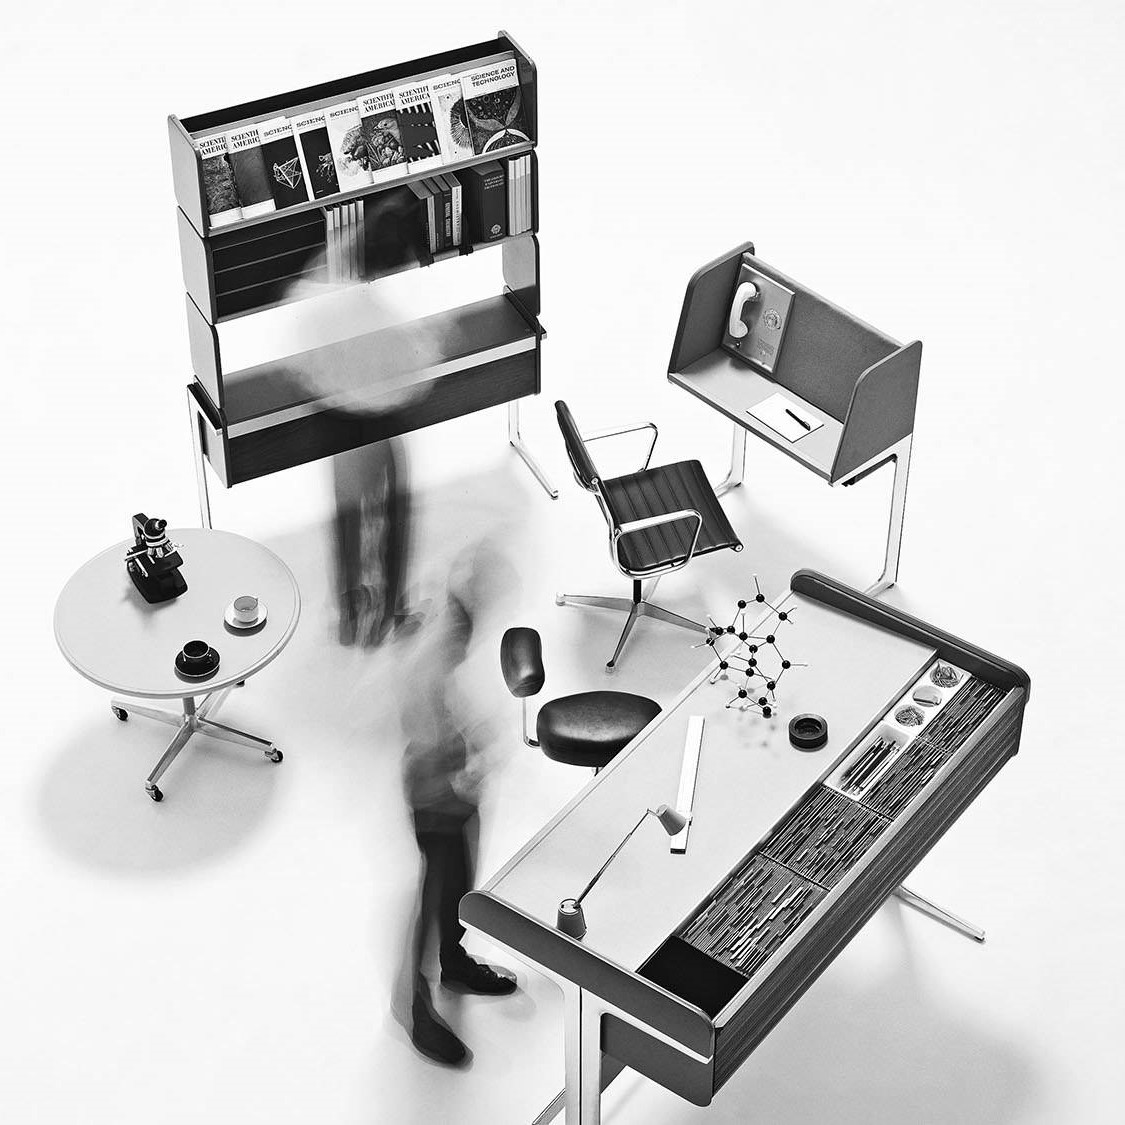 Action Office, one of the first systems aimed at more open plan and flexible office design